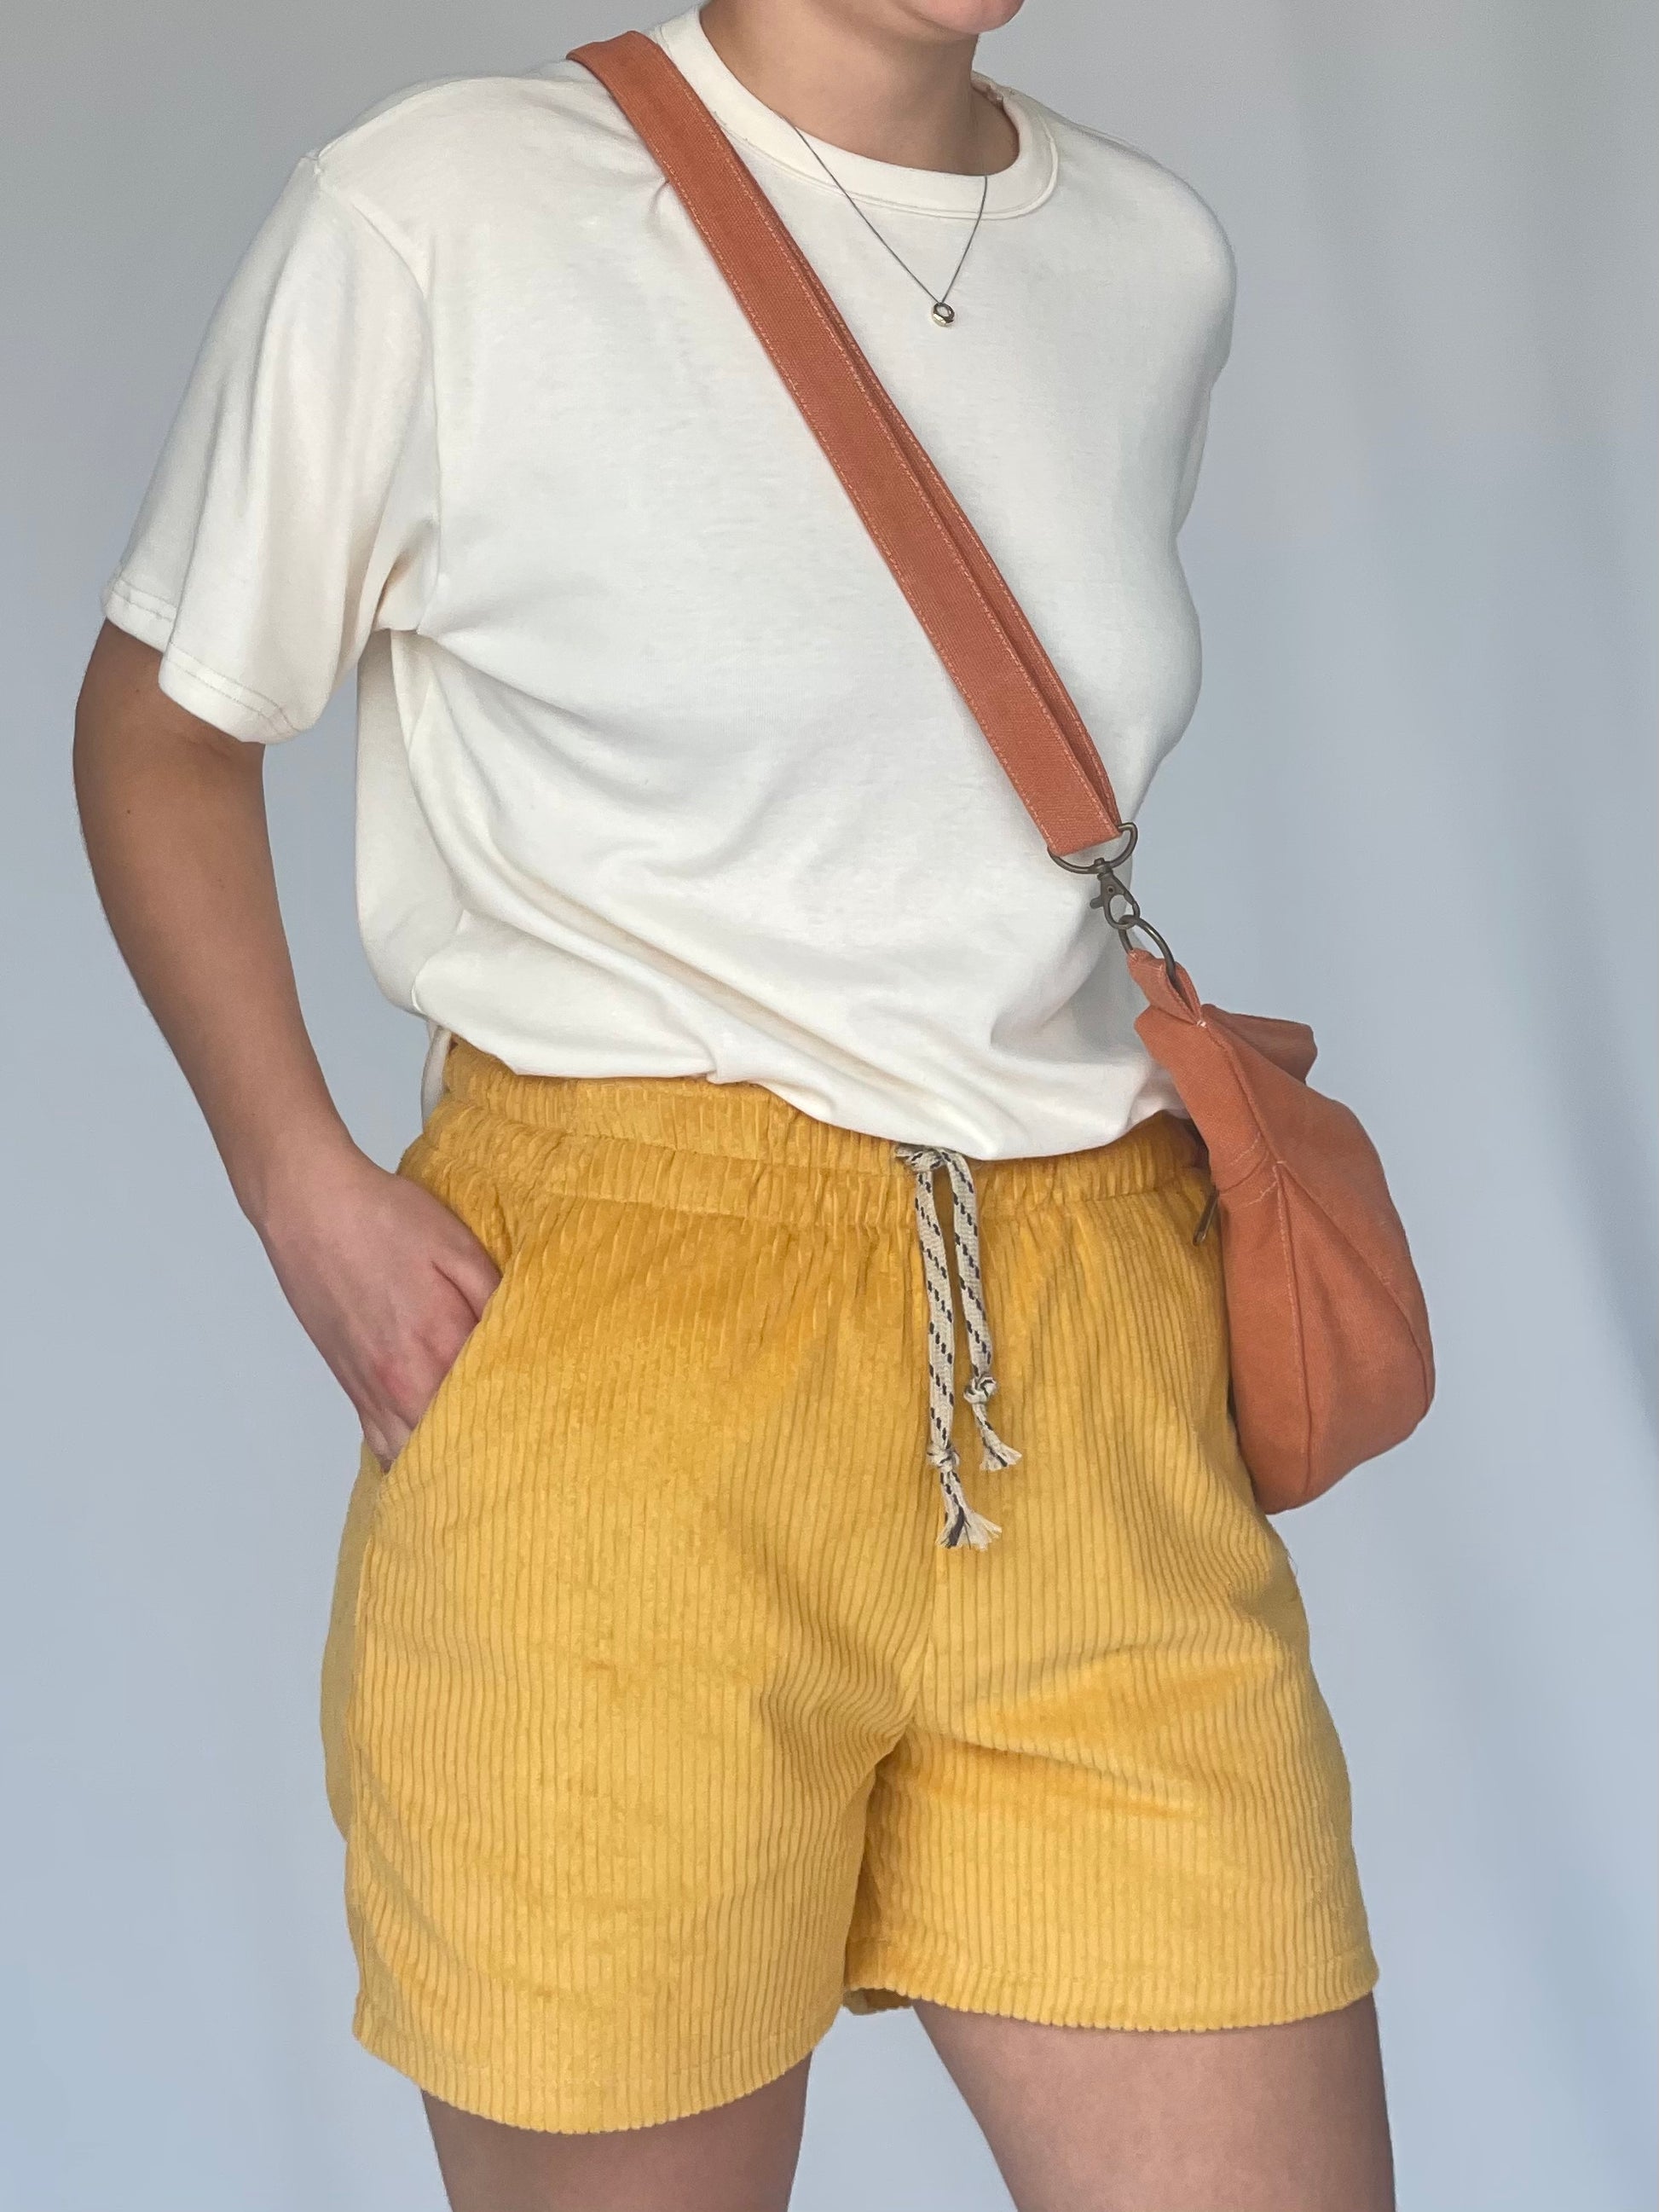 Models wears orange sling bag across body with cream t-shirt and yellow corduroy shorts against a white backdrop.